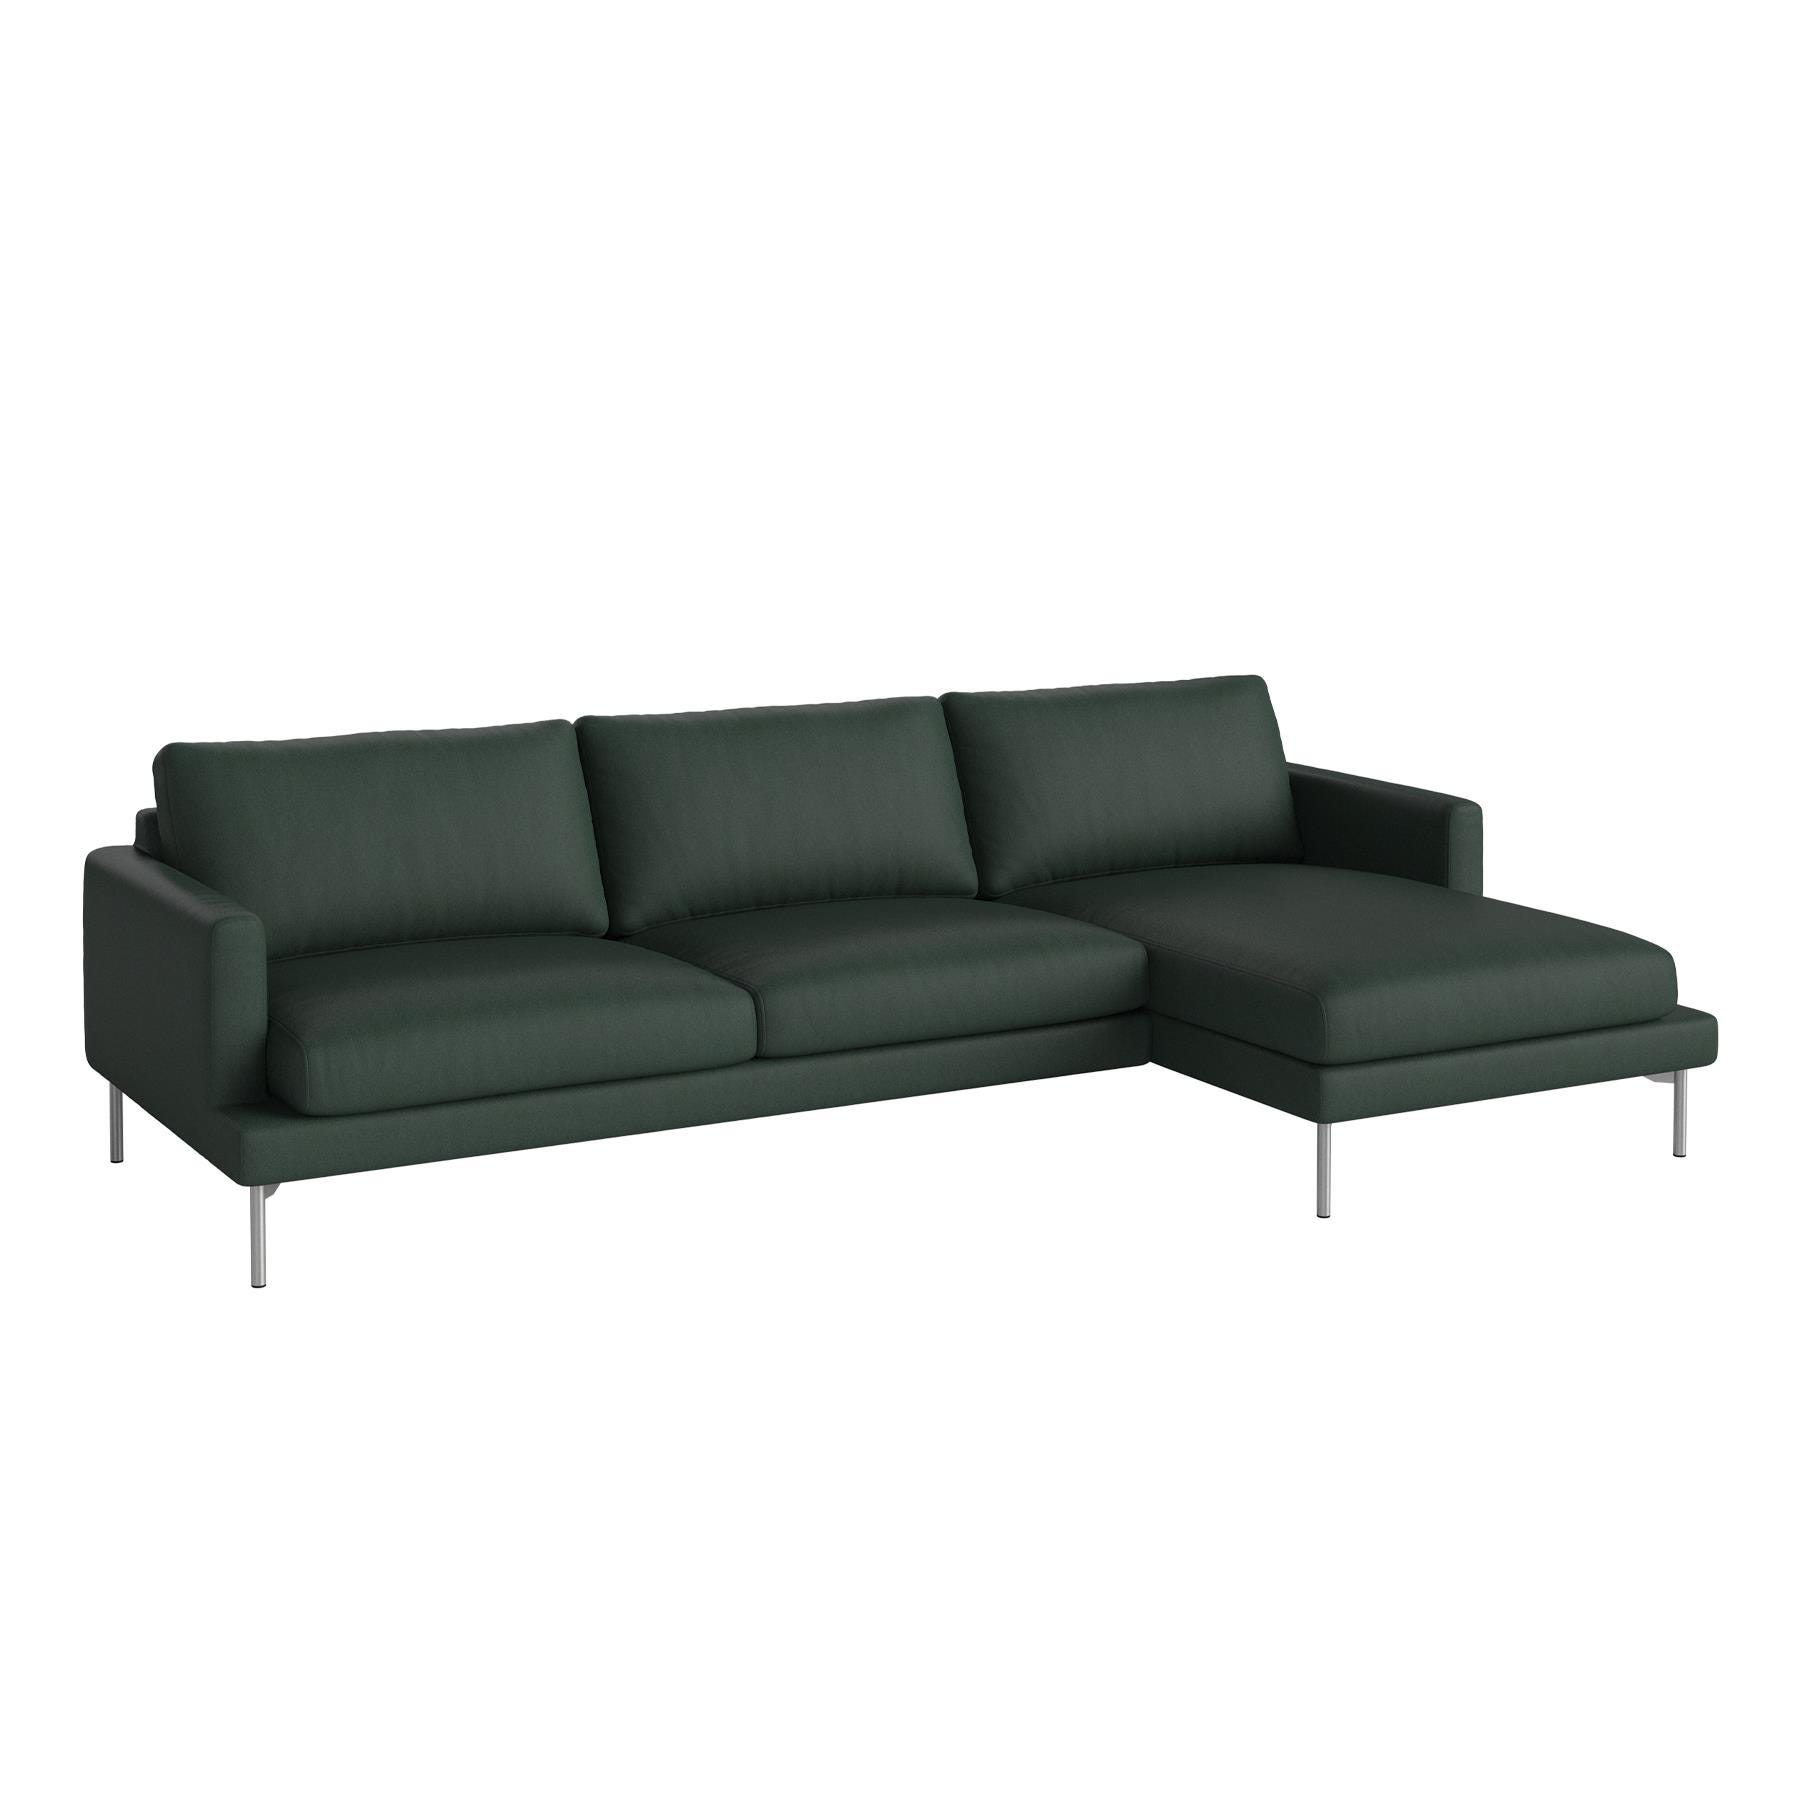 Bolia Veneda Sofa 35 Seater Sofa With Chaise Longue Brushed Steel Gaja Dark Green Right Green Designer Furniture From Holloways Of Ludlow